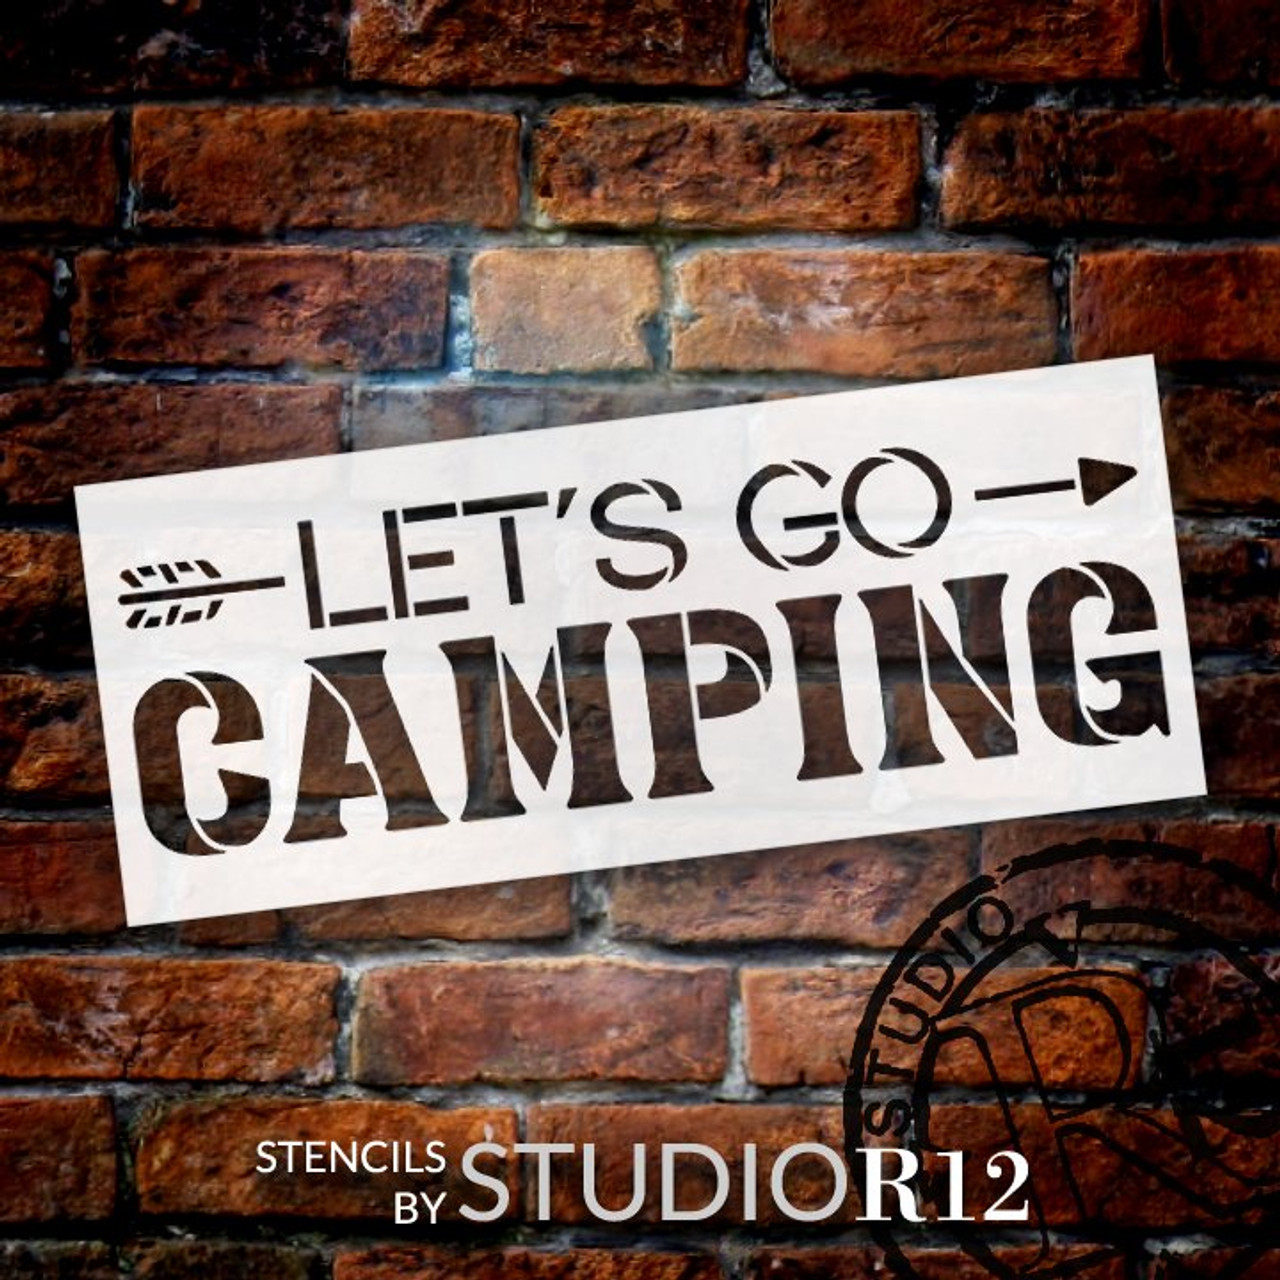 Let's Go Camping Stencil with Arrow by StudioR12 | DIY Country Rustic Home Decor | Camper Adventure Word Art | Craft & Paint Wood Sign | Reusable Mylar Template | Size 13.5 x 5.5 inch